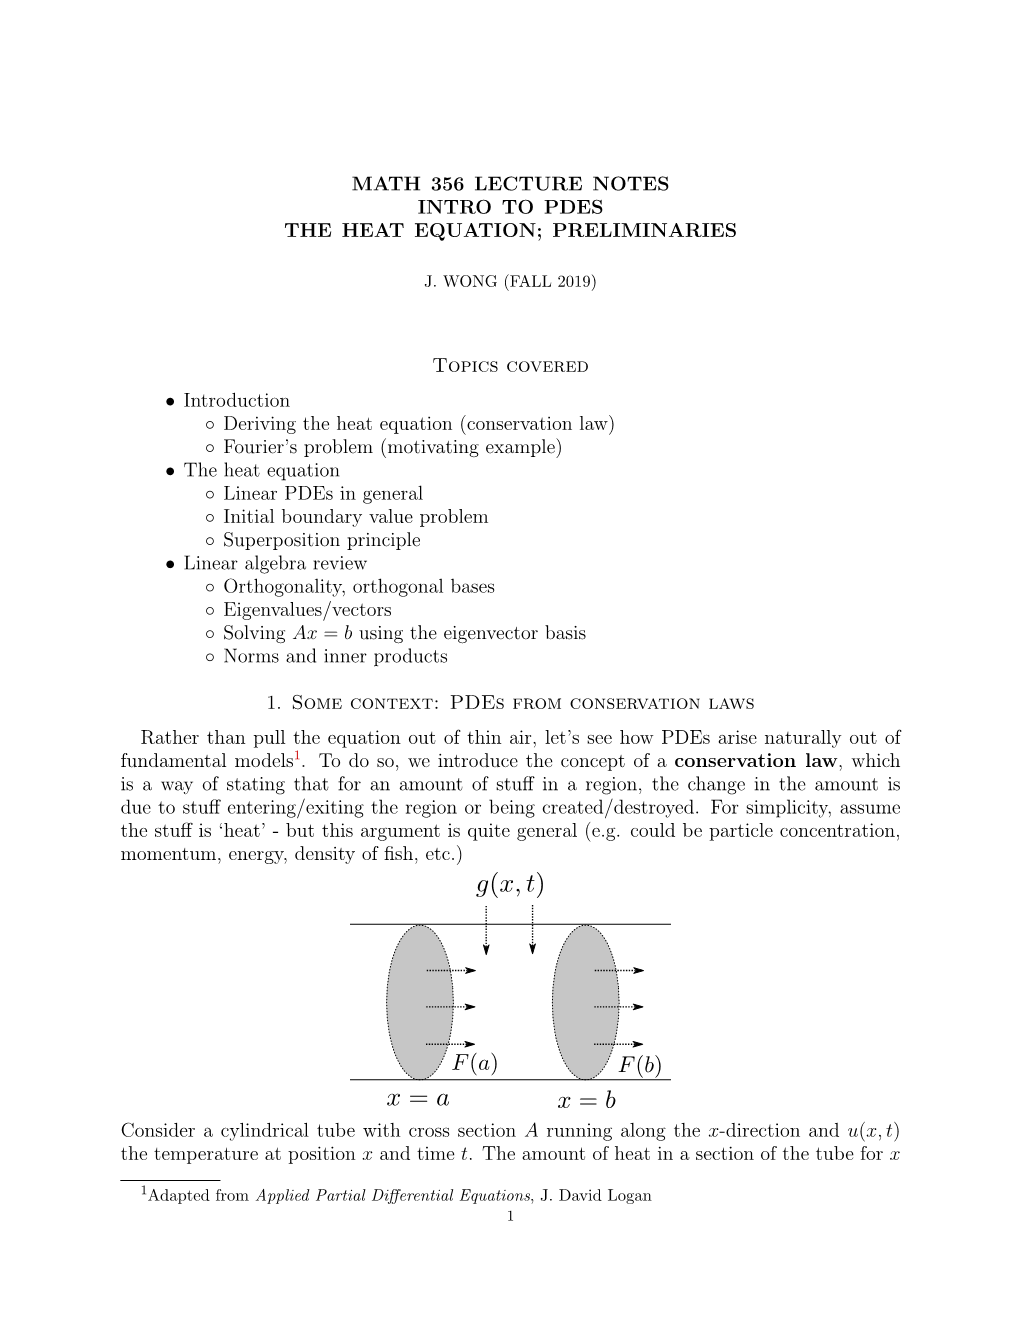 Math 356 Lecture Notes Intro to Pdes the Heat Equation; Preliminaries